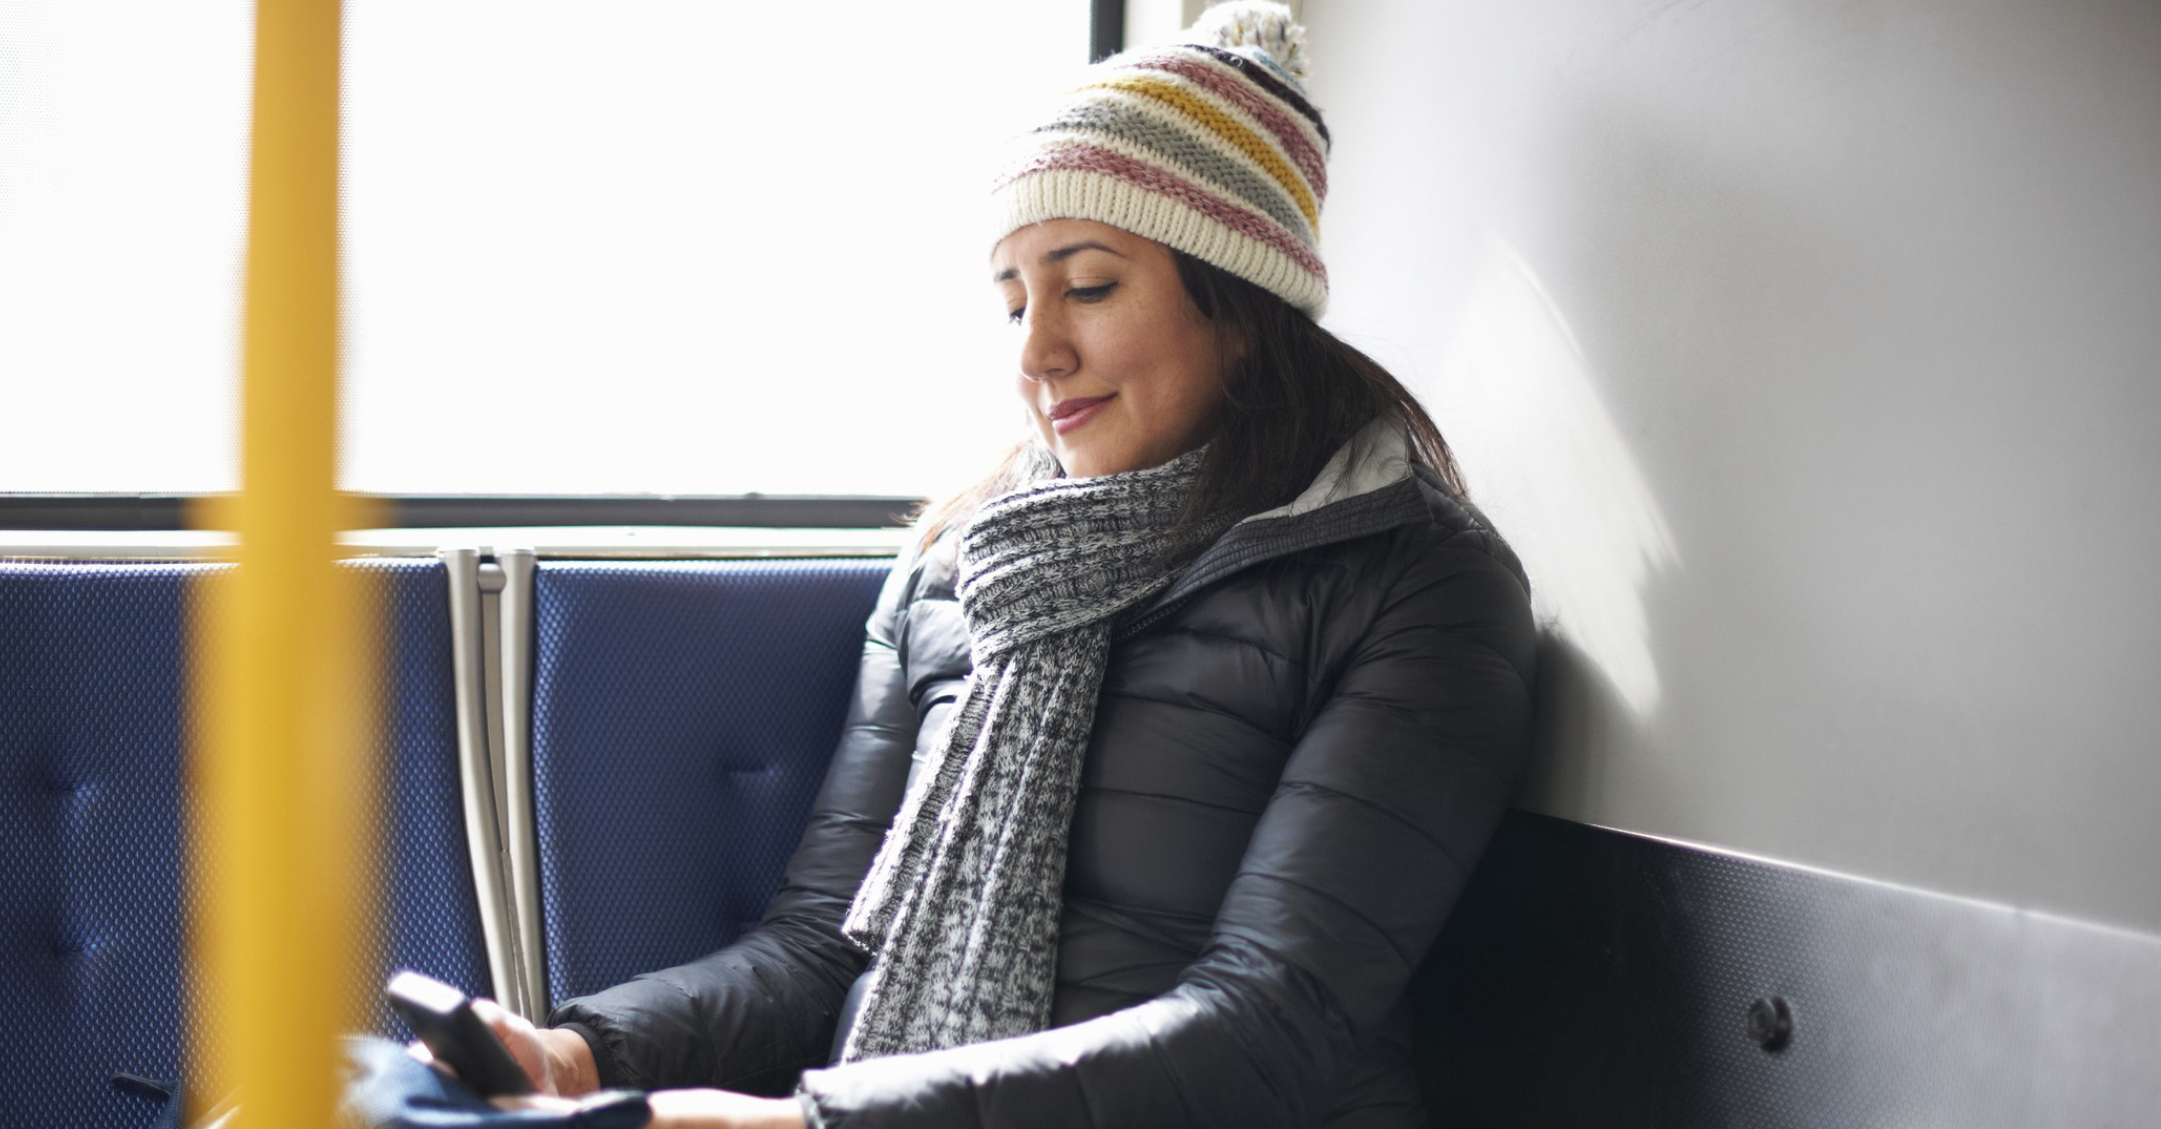 A woman wearing a hat and winter scarf smiles down at her phone while sitting on a bus.